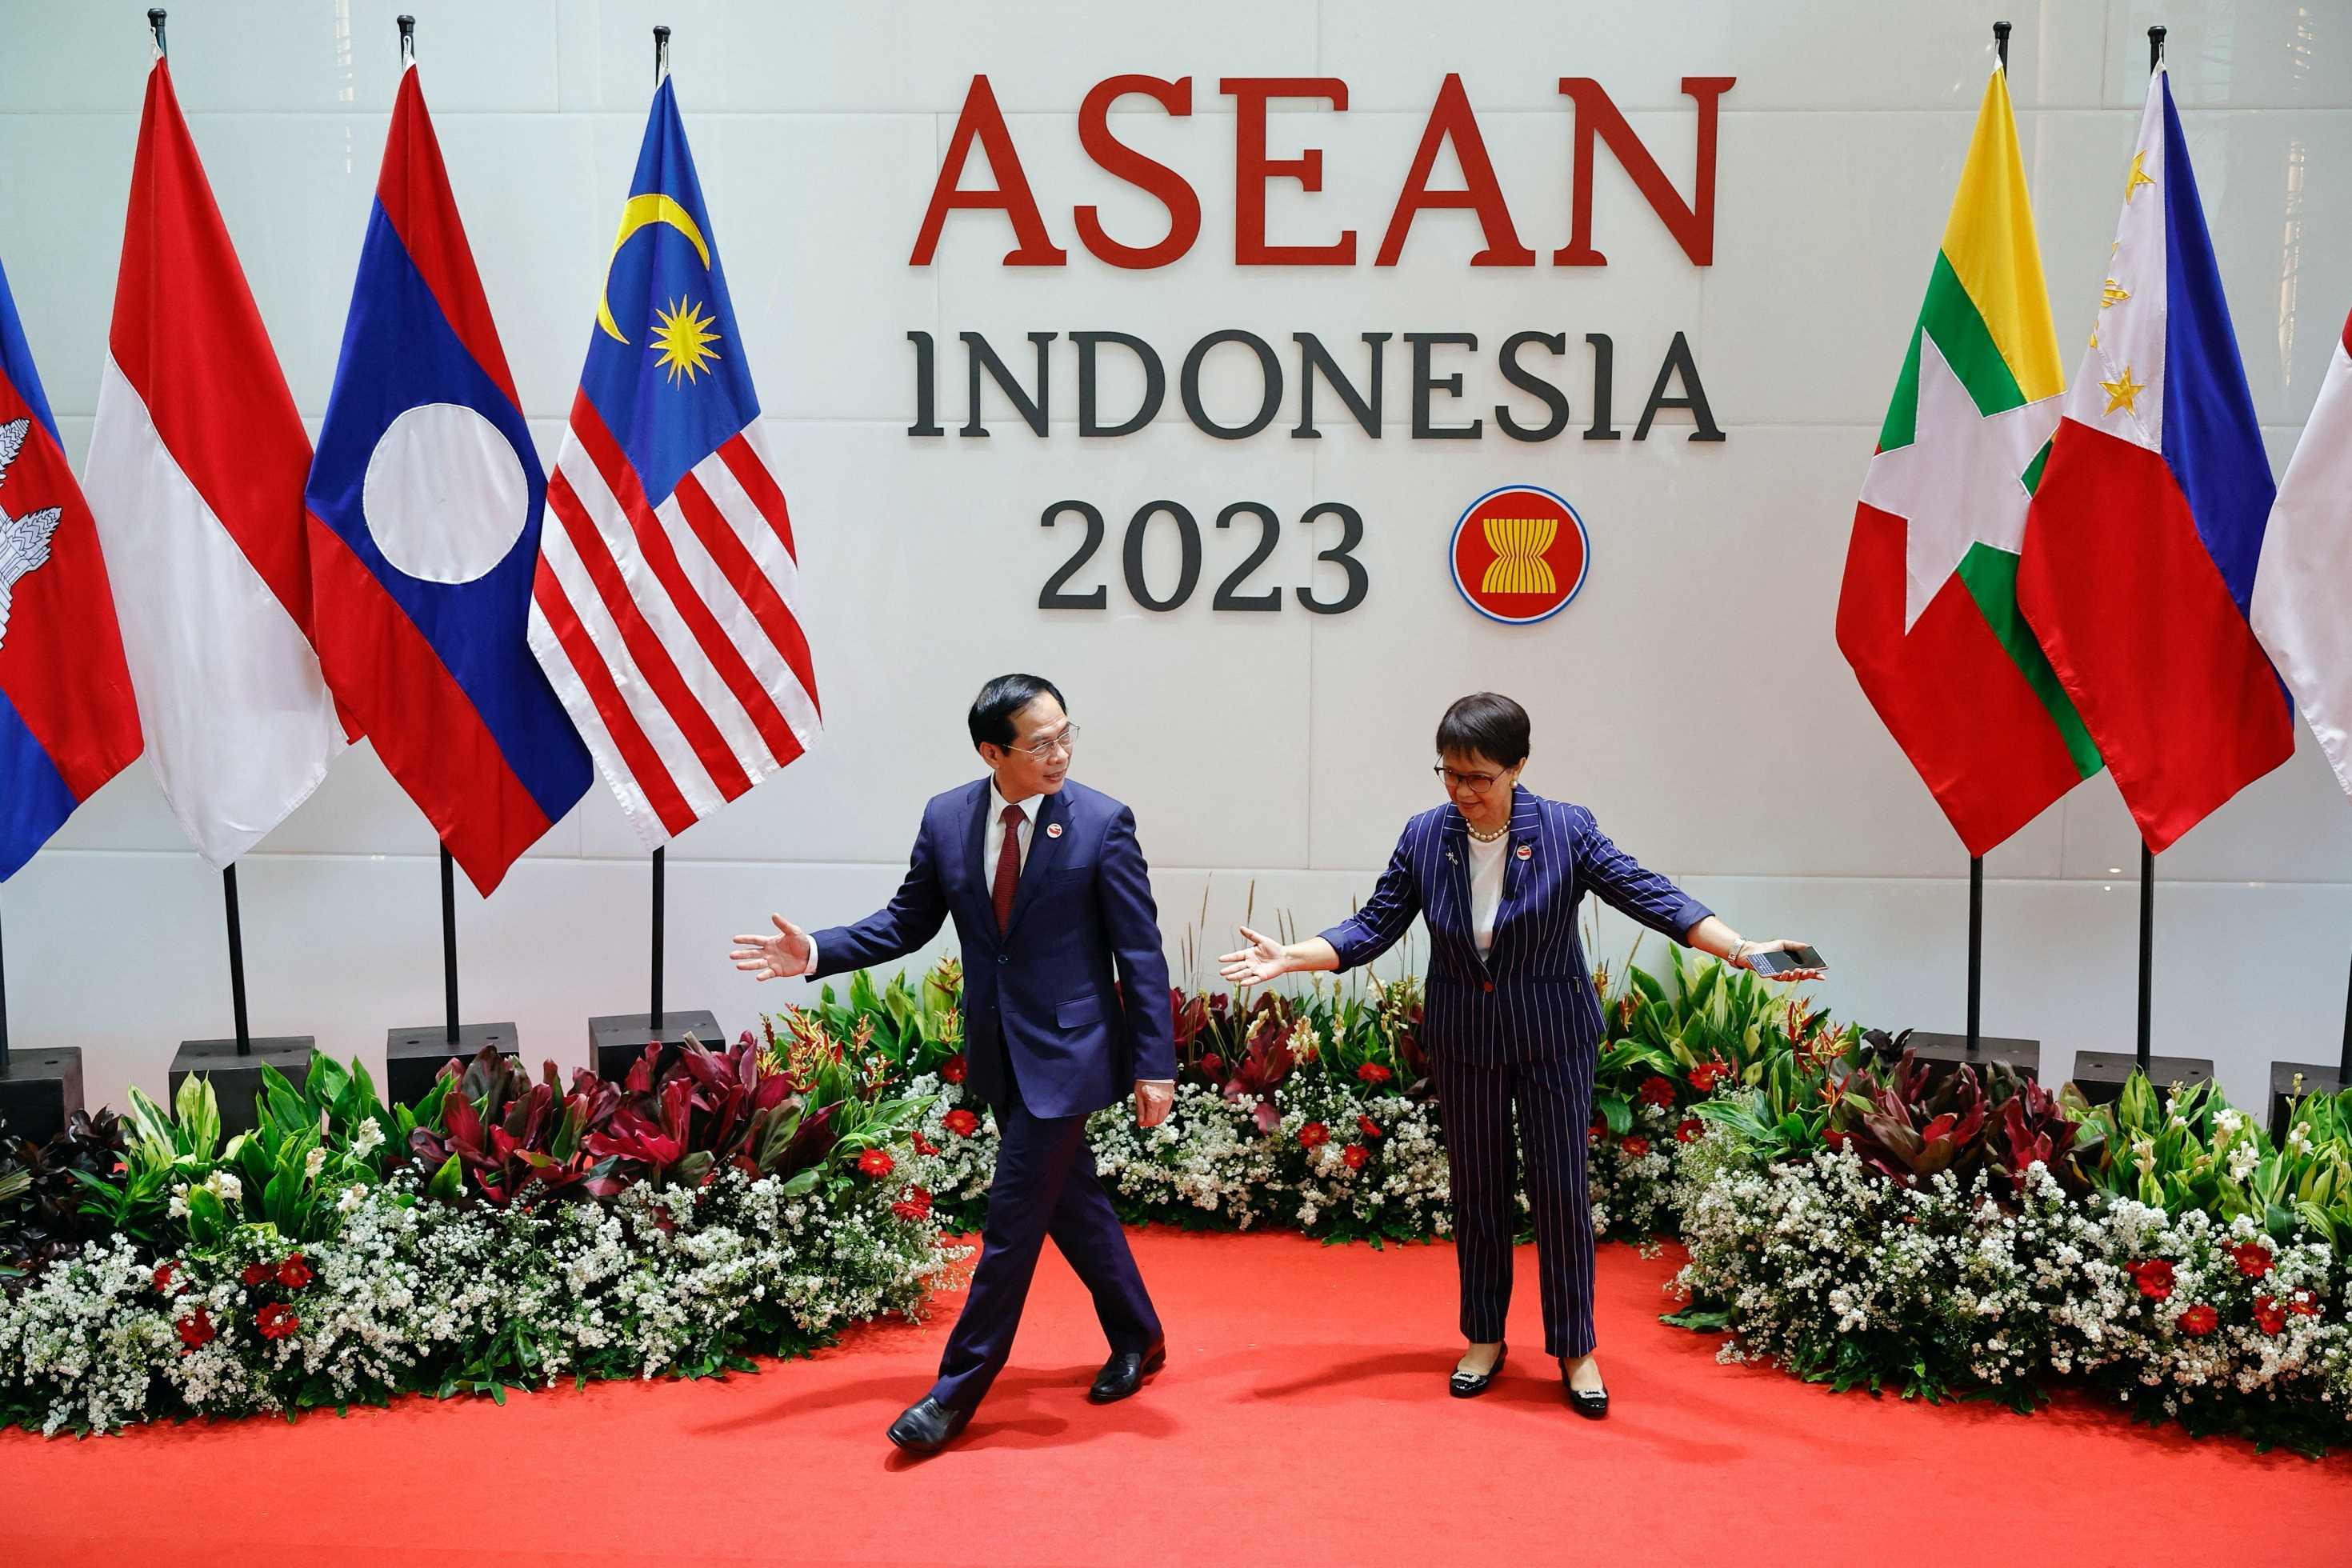 2023-02-03T092604Z_773150113_RC2I3Z9D6QXP_RTRMADP_3_ASEAN-INDONESIA-FOREIGN-MINISTERS